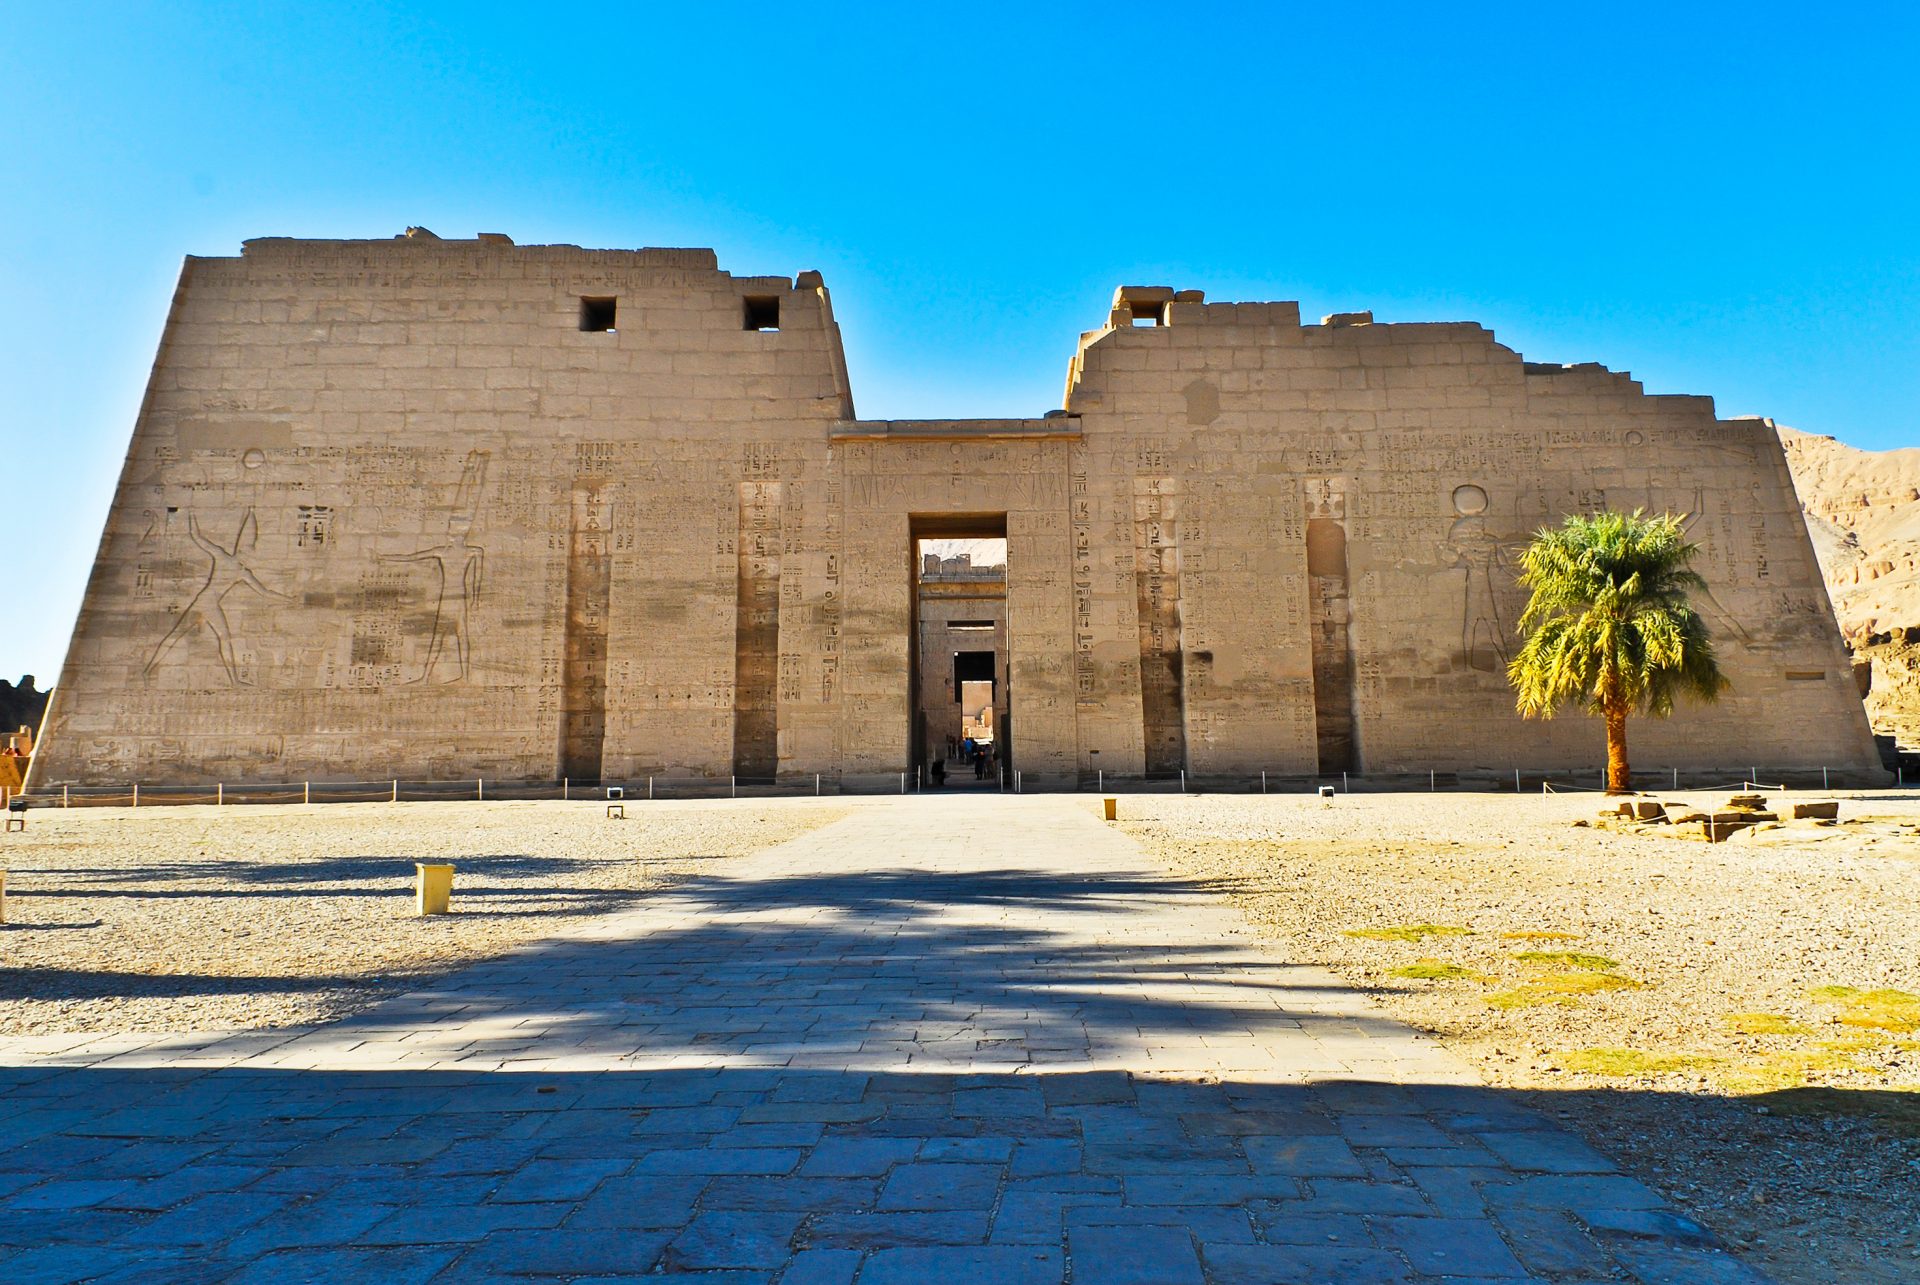 Photo of Medinet Habu, the large and well-preserved Mortuary Temple of Ramesses III in Luxor, Egypt, with towering ancient walls adorned with carvings and hieroglyphs, depicting historical scenes including the pharaoh's triumph over the Sea Peoples.